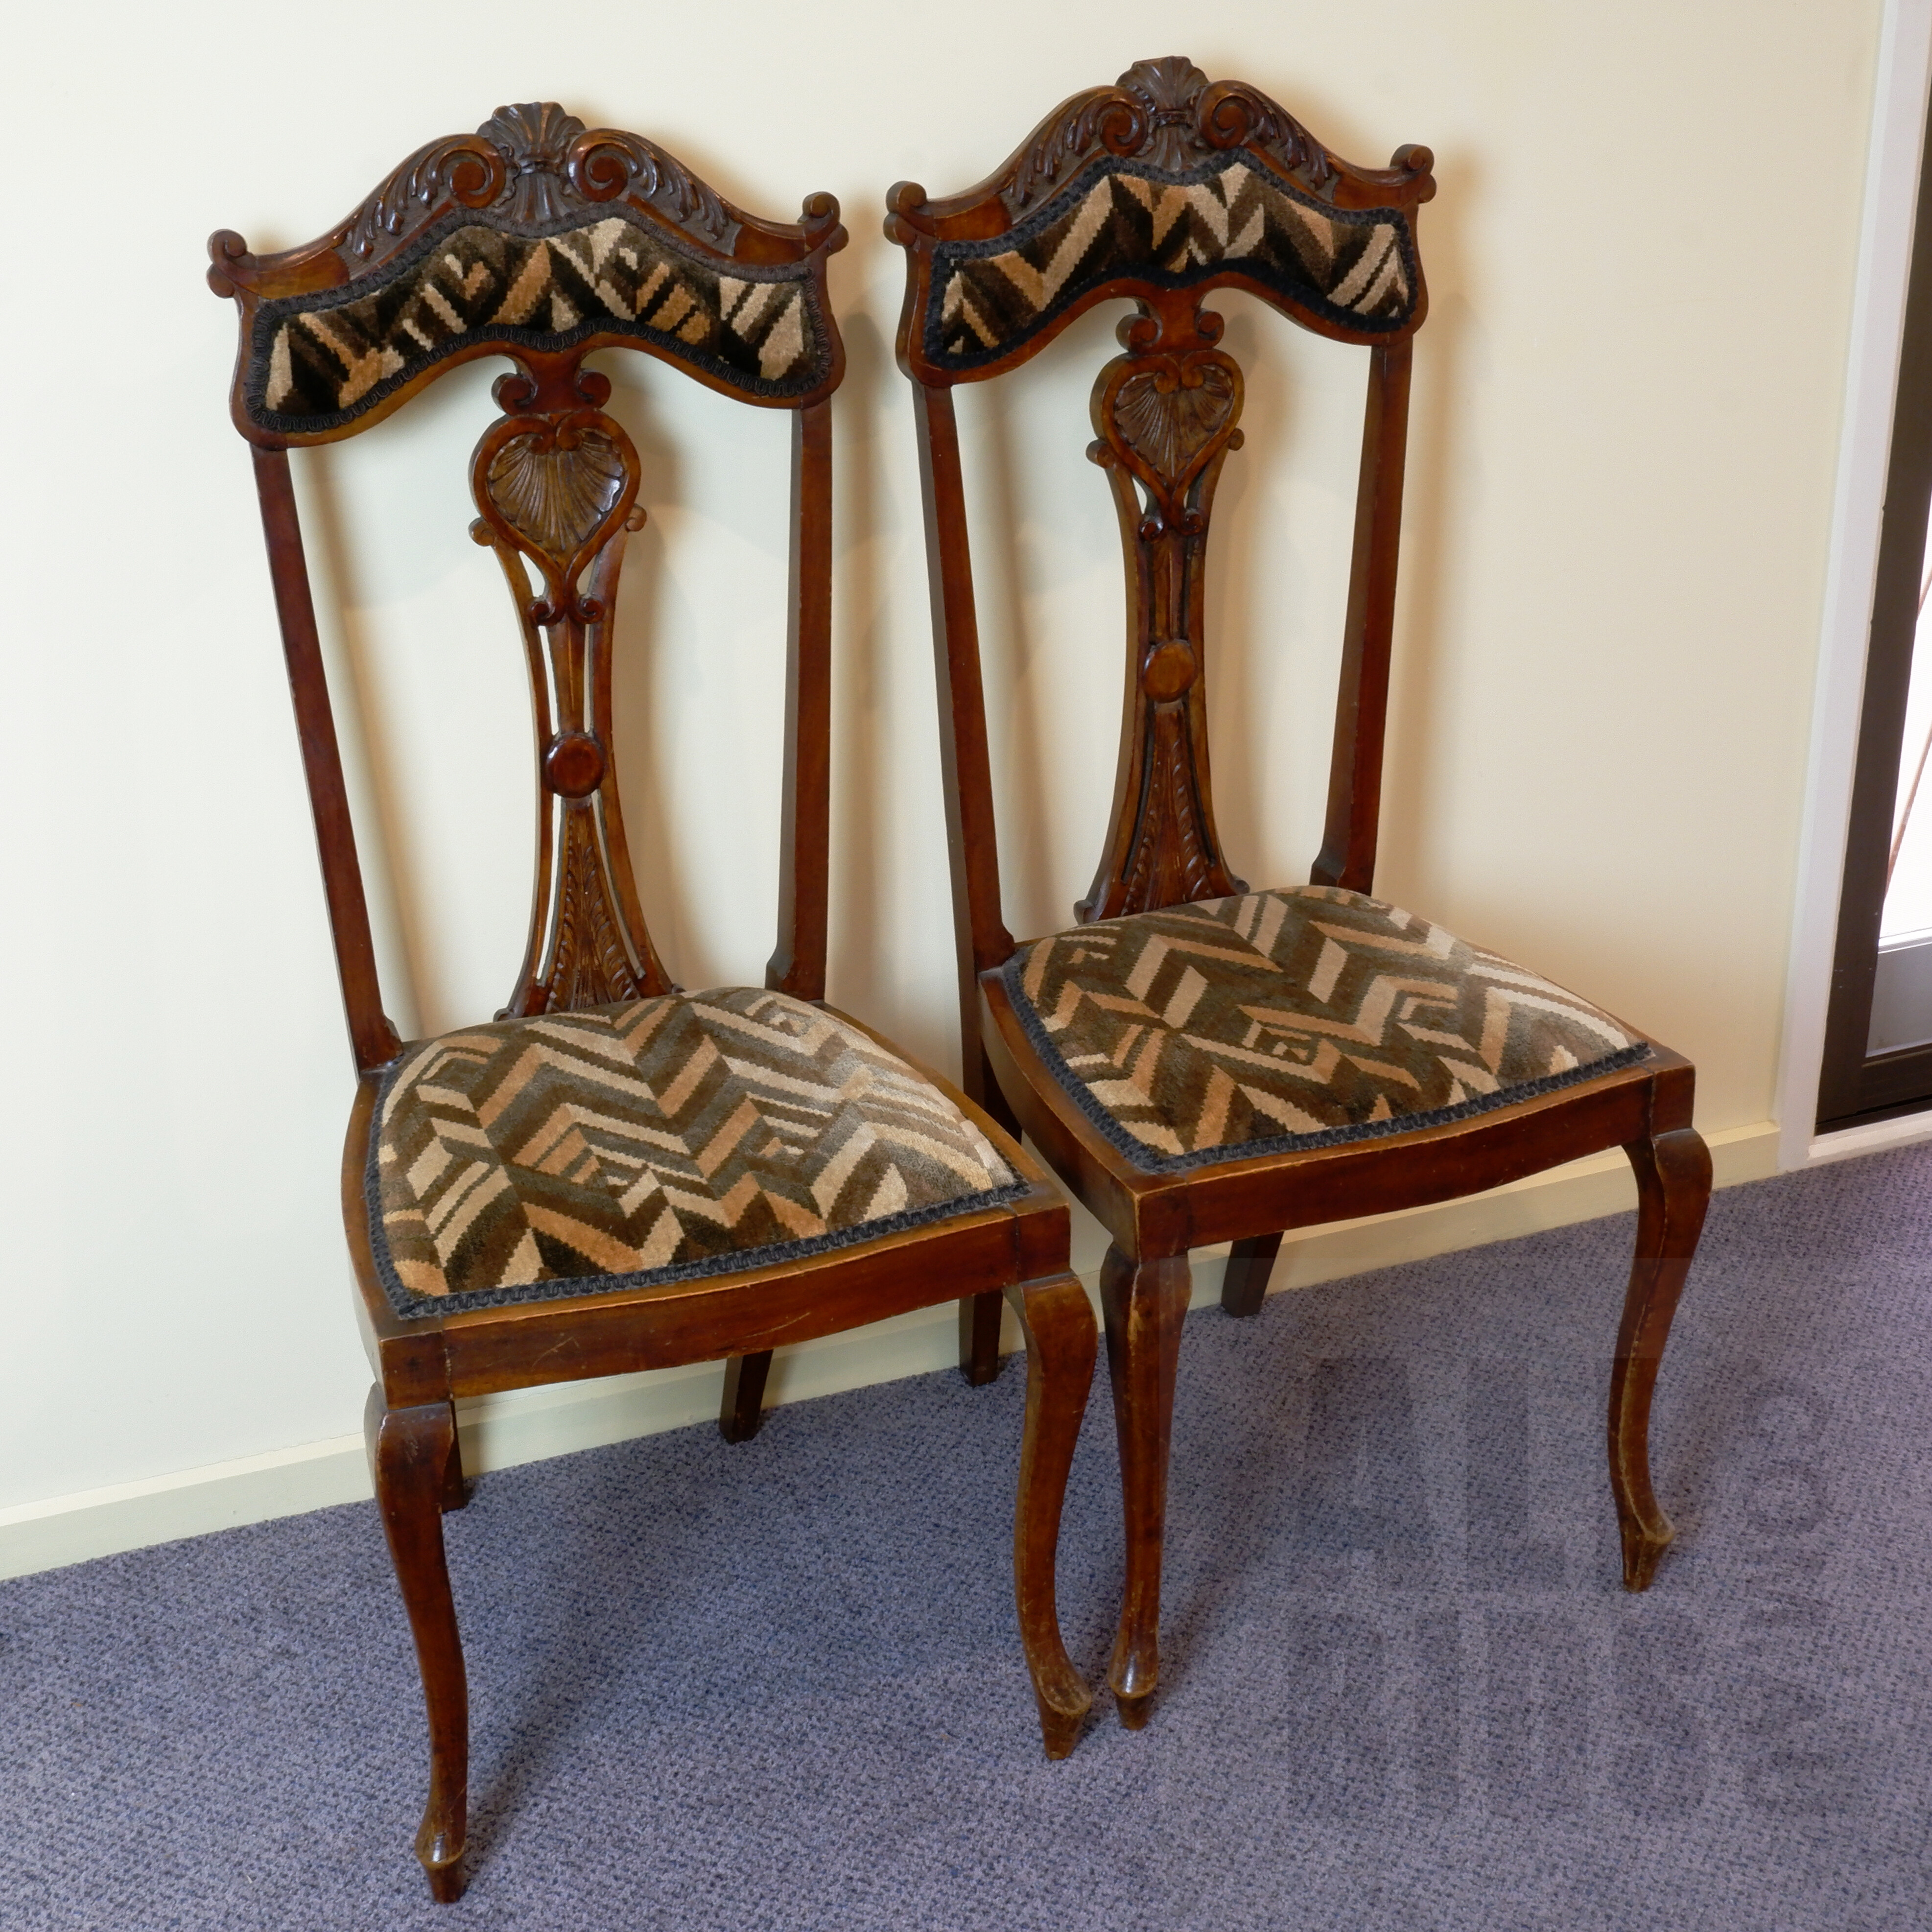 'Pair of Early 20th Century Maple Chairs with Carved Shell and Scroll Work'